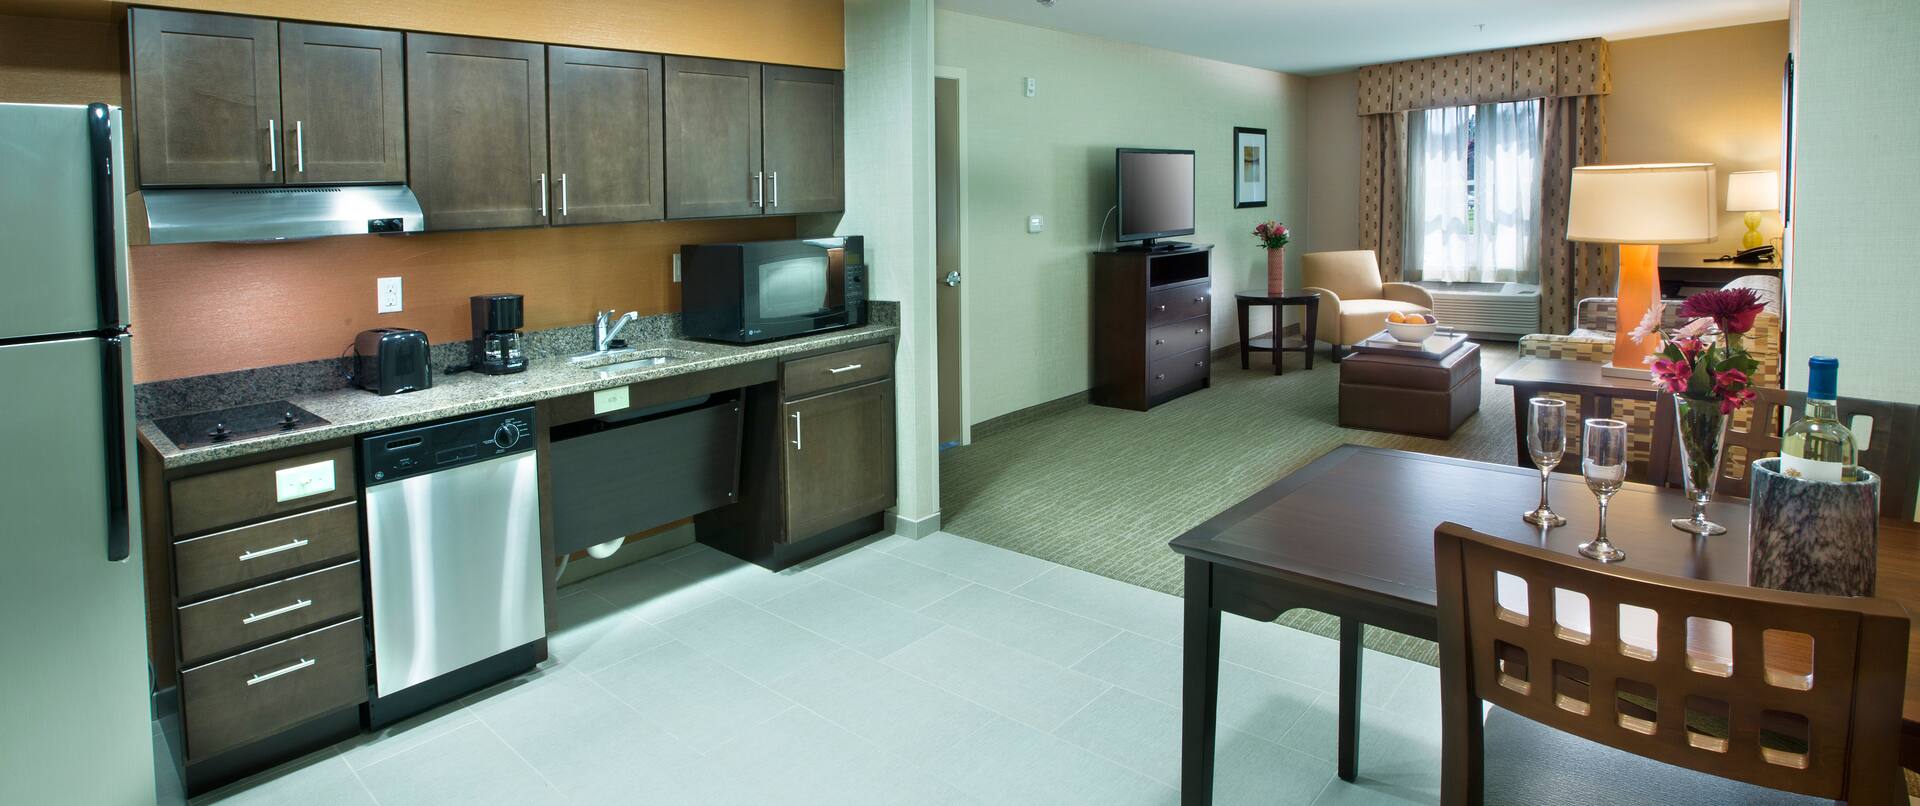 Suite Kitchen With Wall Art, Fridge, Wood Cabinets, Microwave Over Stovetop, Sink, Dishwasher, Coffee Maker, and Dining Table With Seating for Two